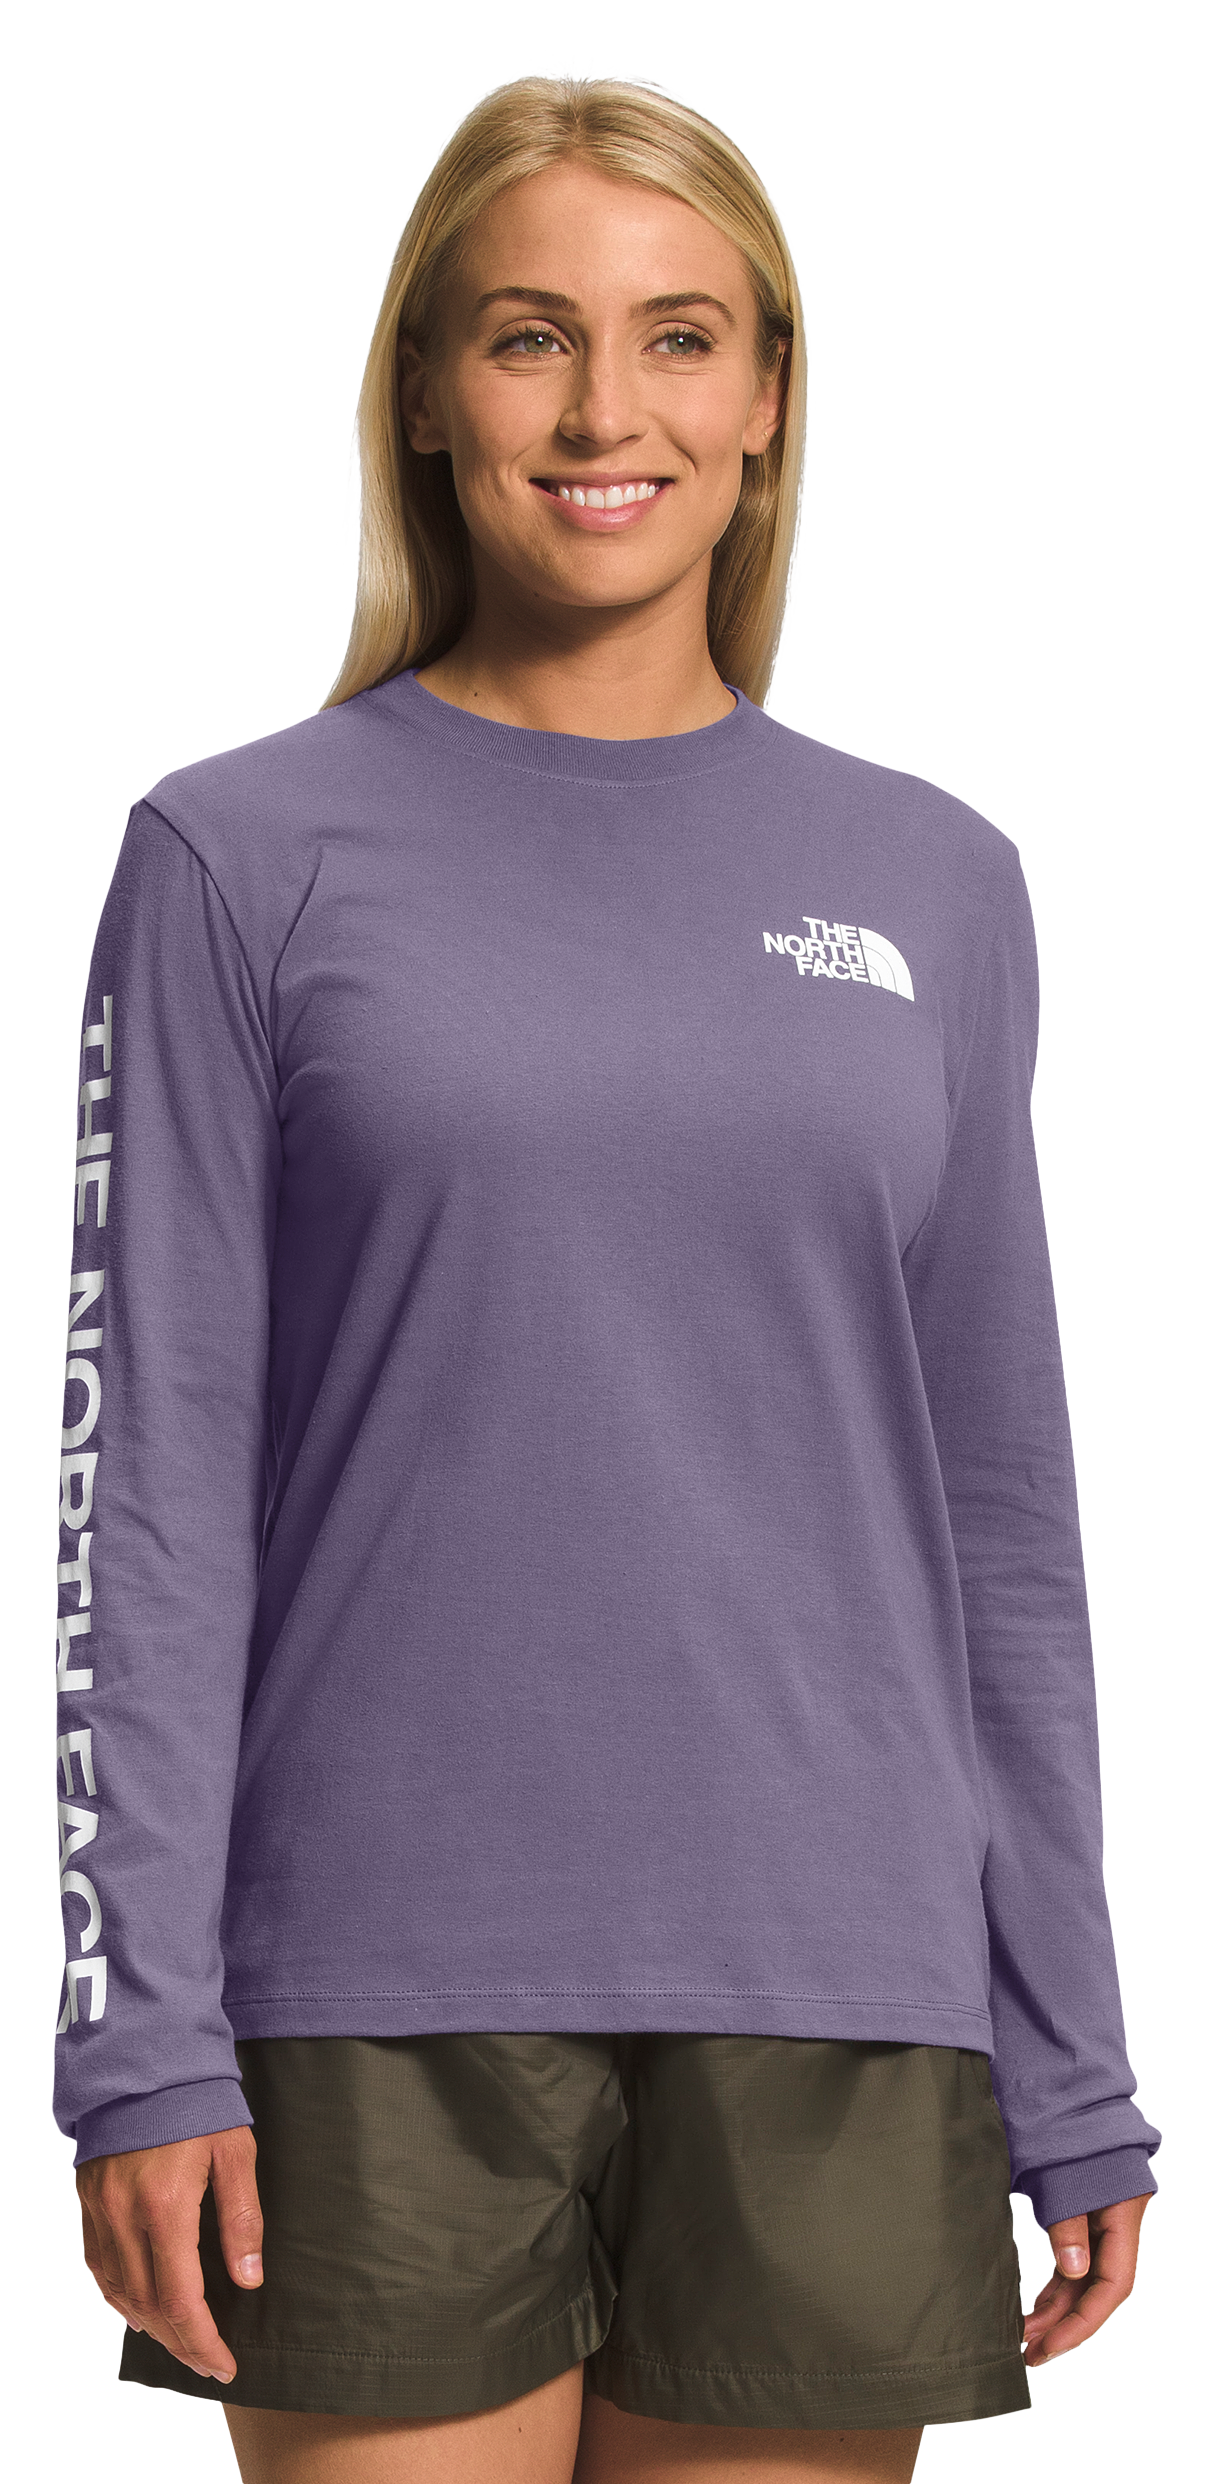 The North Face Hit Graphic Long-Sleeve T-Shirt for Ladies - Lunar Slate/TNF White - S